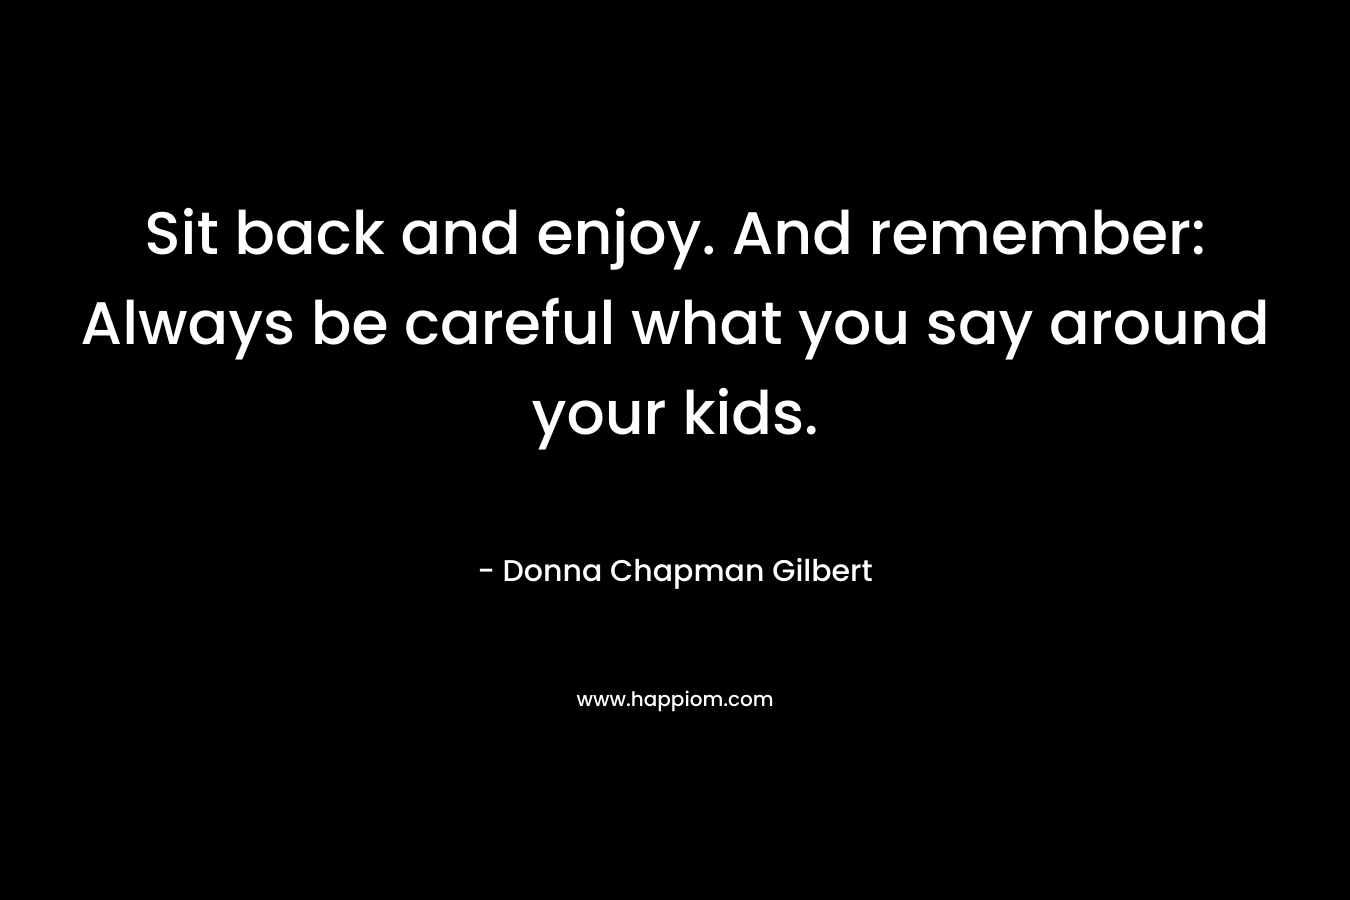 Sit back and enjoy. And remember: Always be careful what you say around your kids.